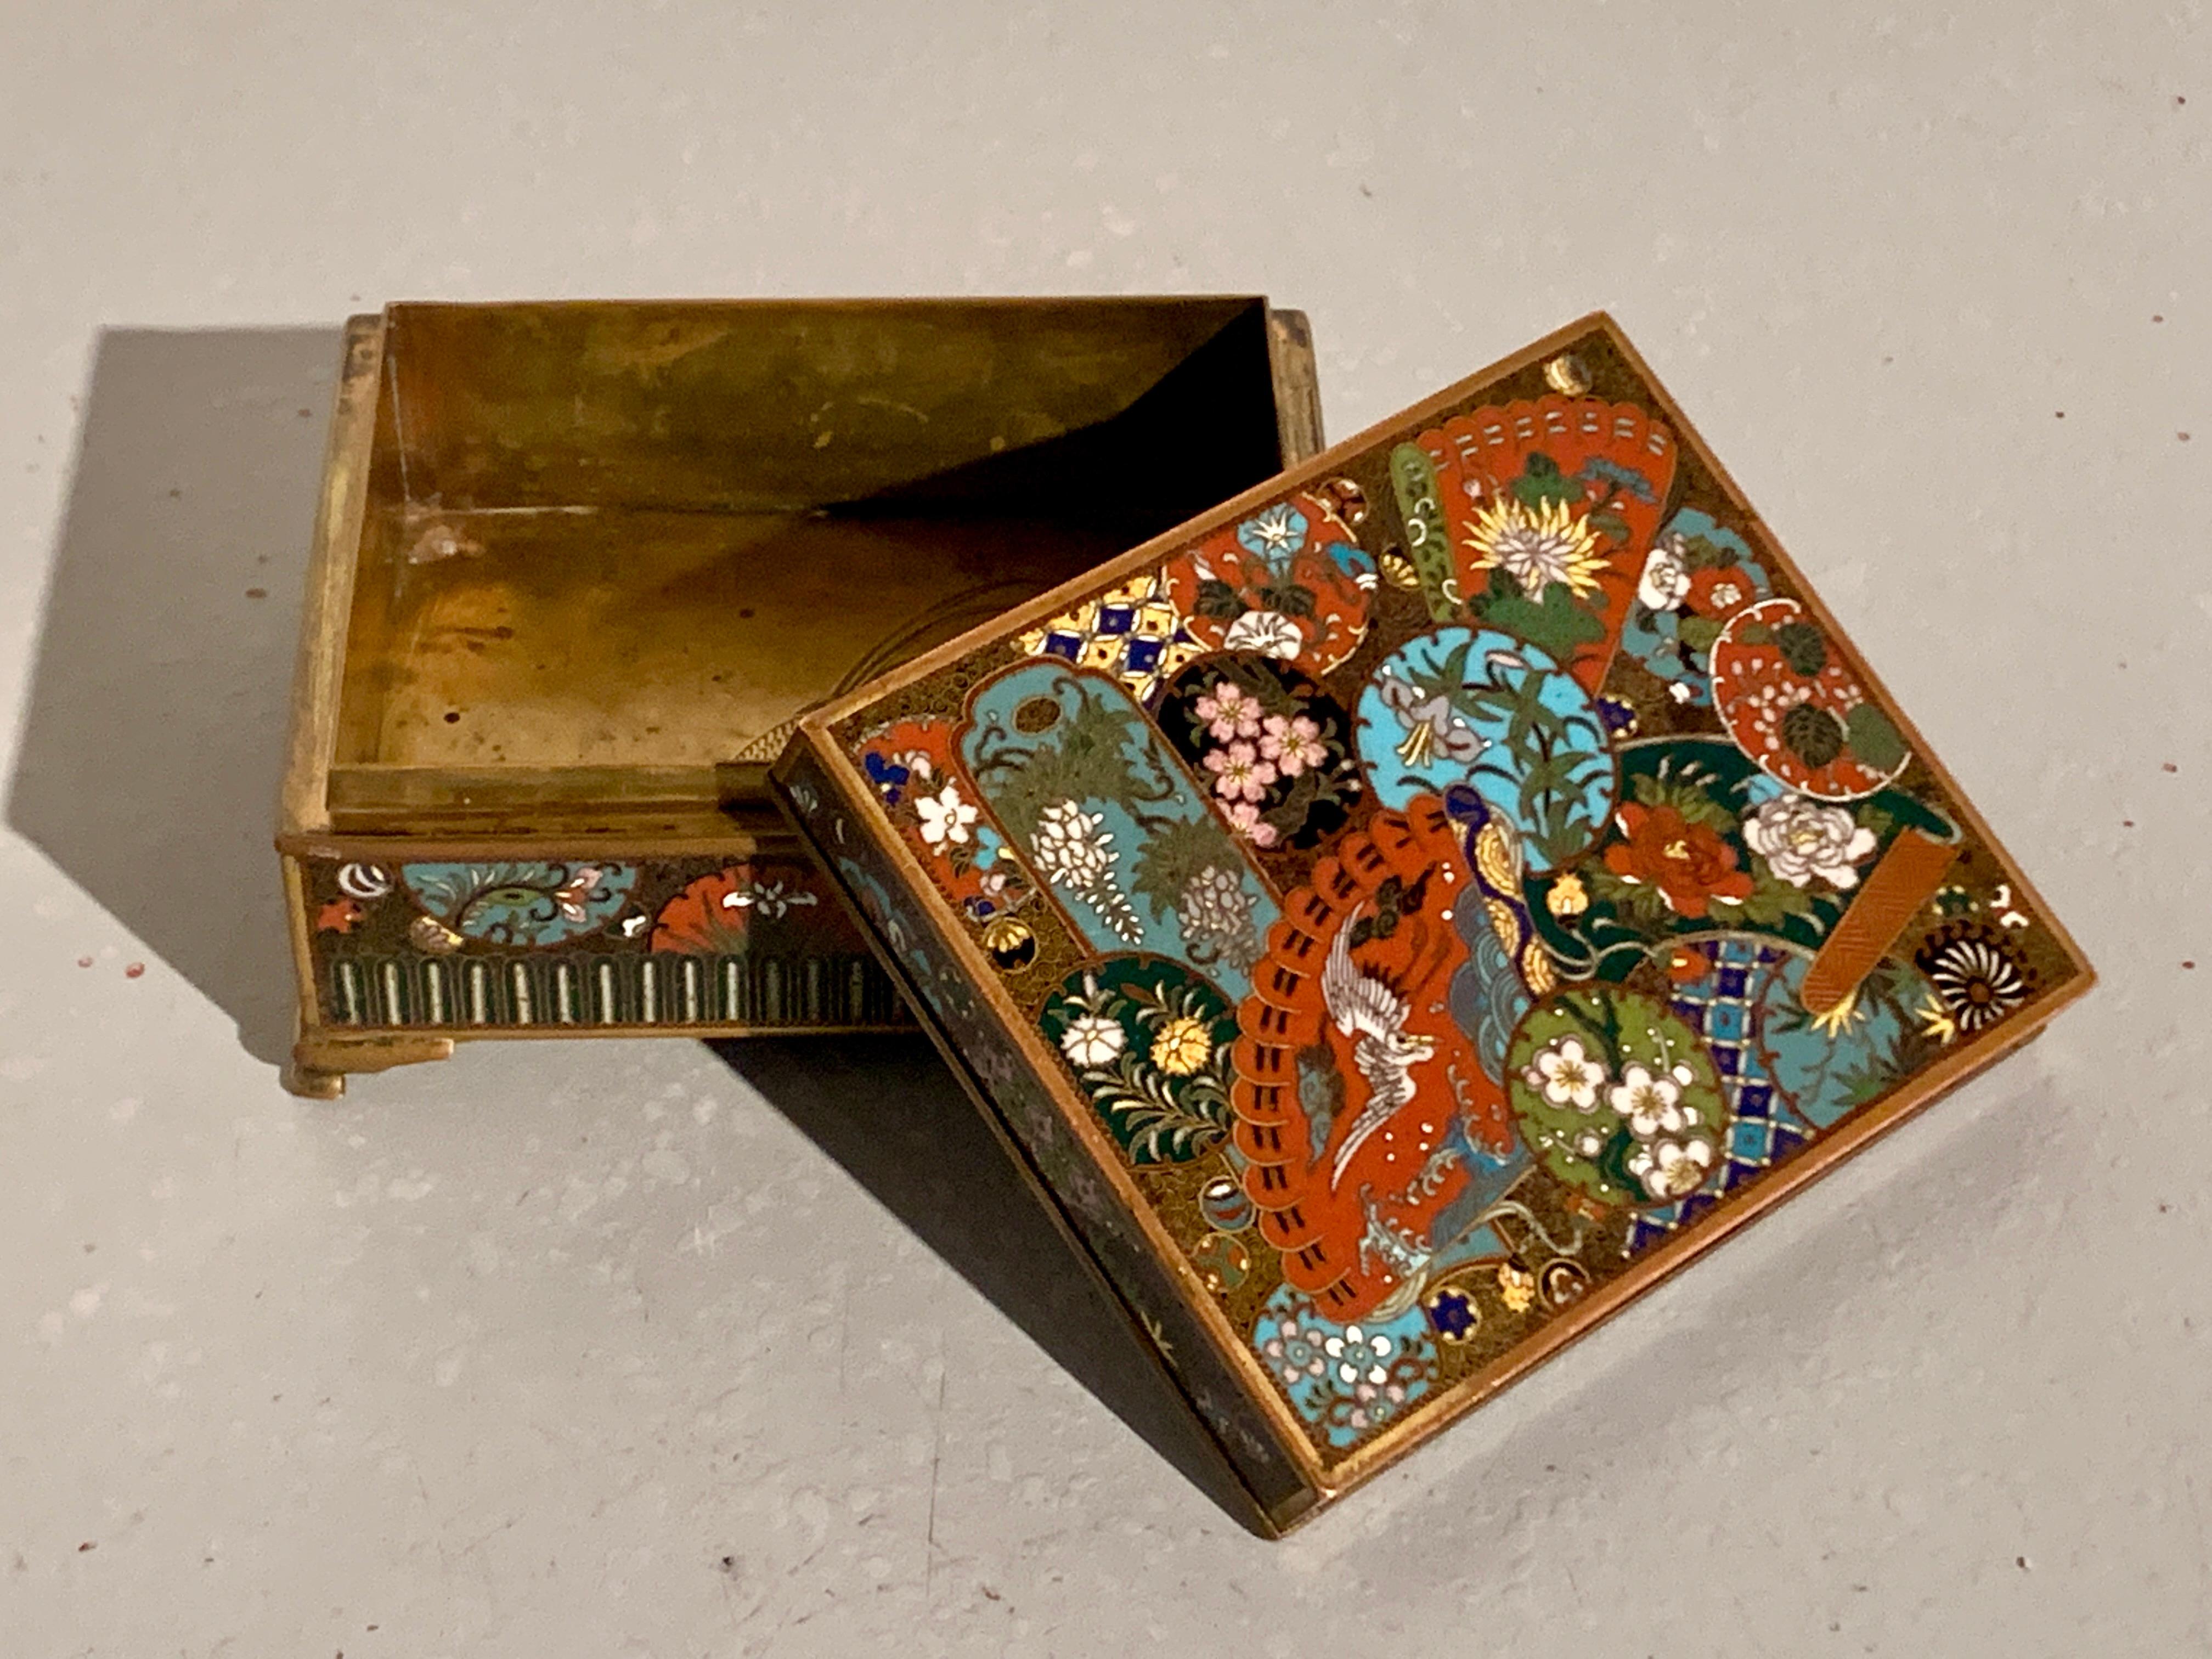 A very fine and intricately decorated Japanese cloisonné box and cover, Meiji period, late 19th century, Japan.

The lidded trinket or jewelry box exquisitely decorated in the cloisonné enamel technique upon a copper base, the interior of brass